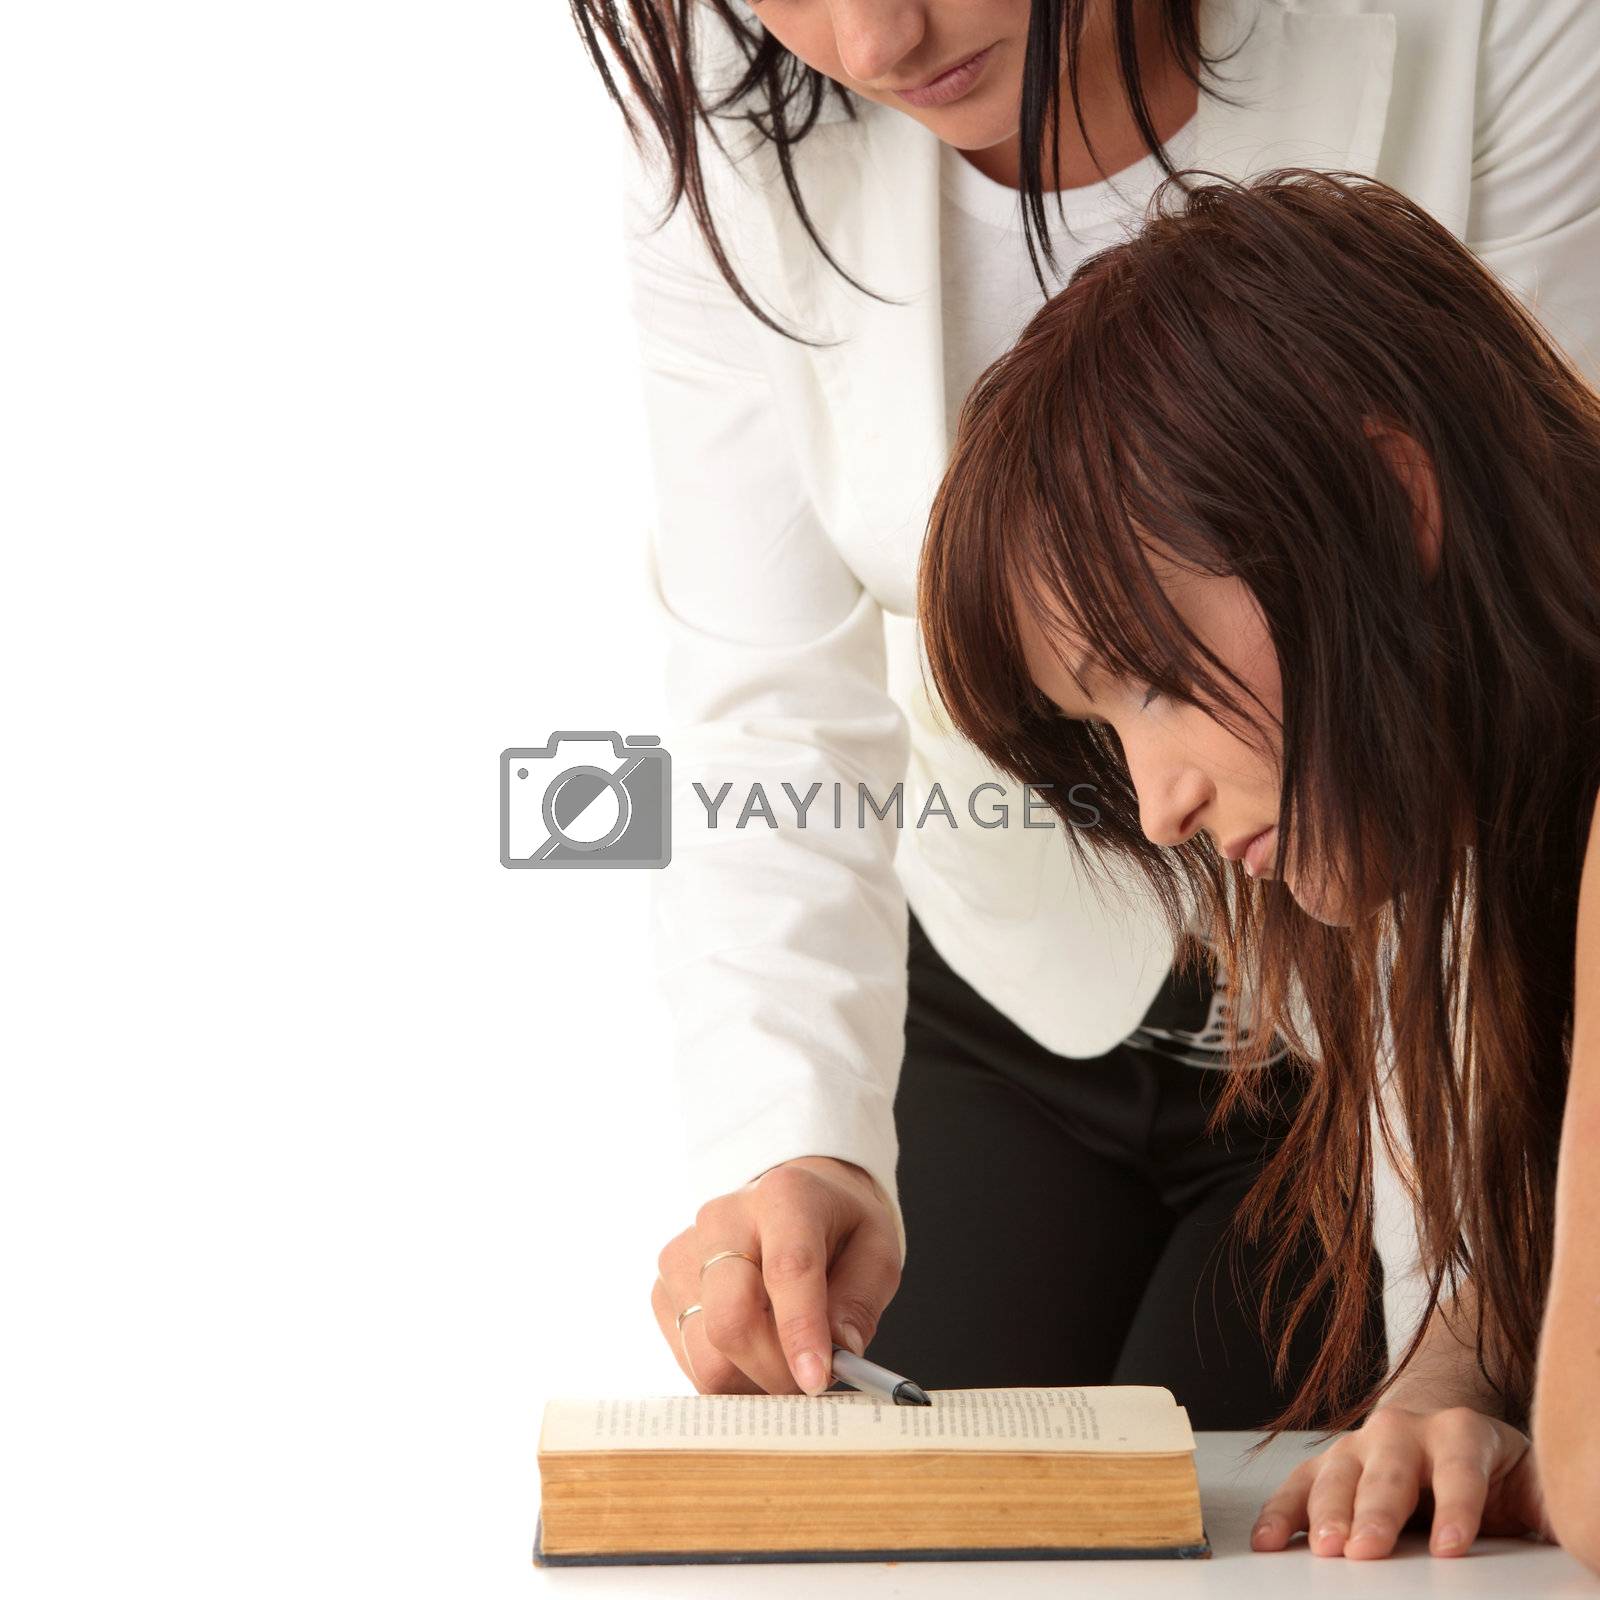 Royalty free image of Teacher and student by BDS